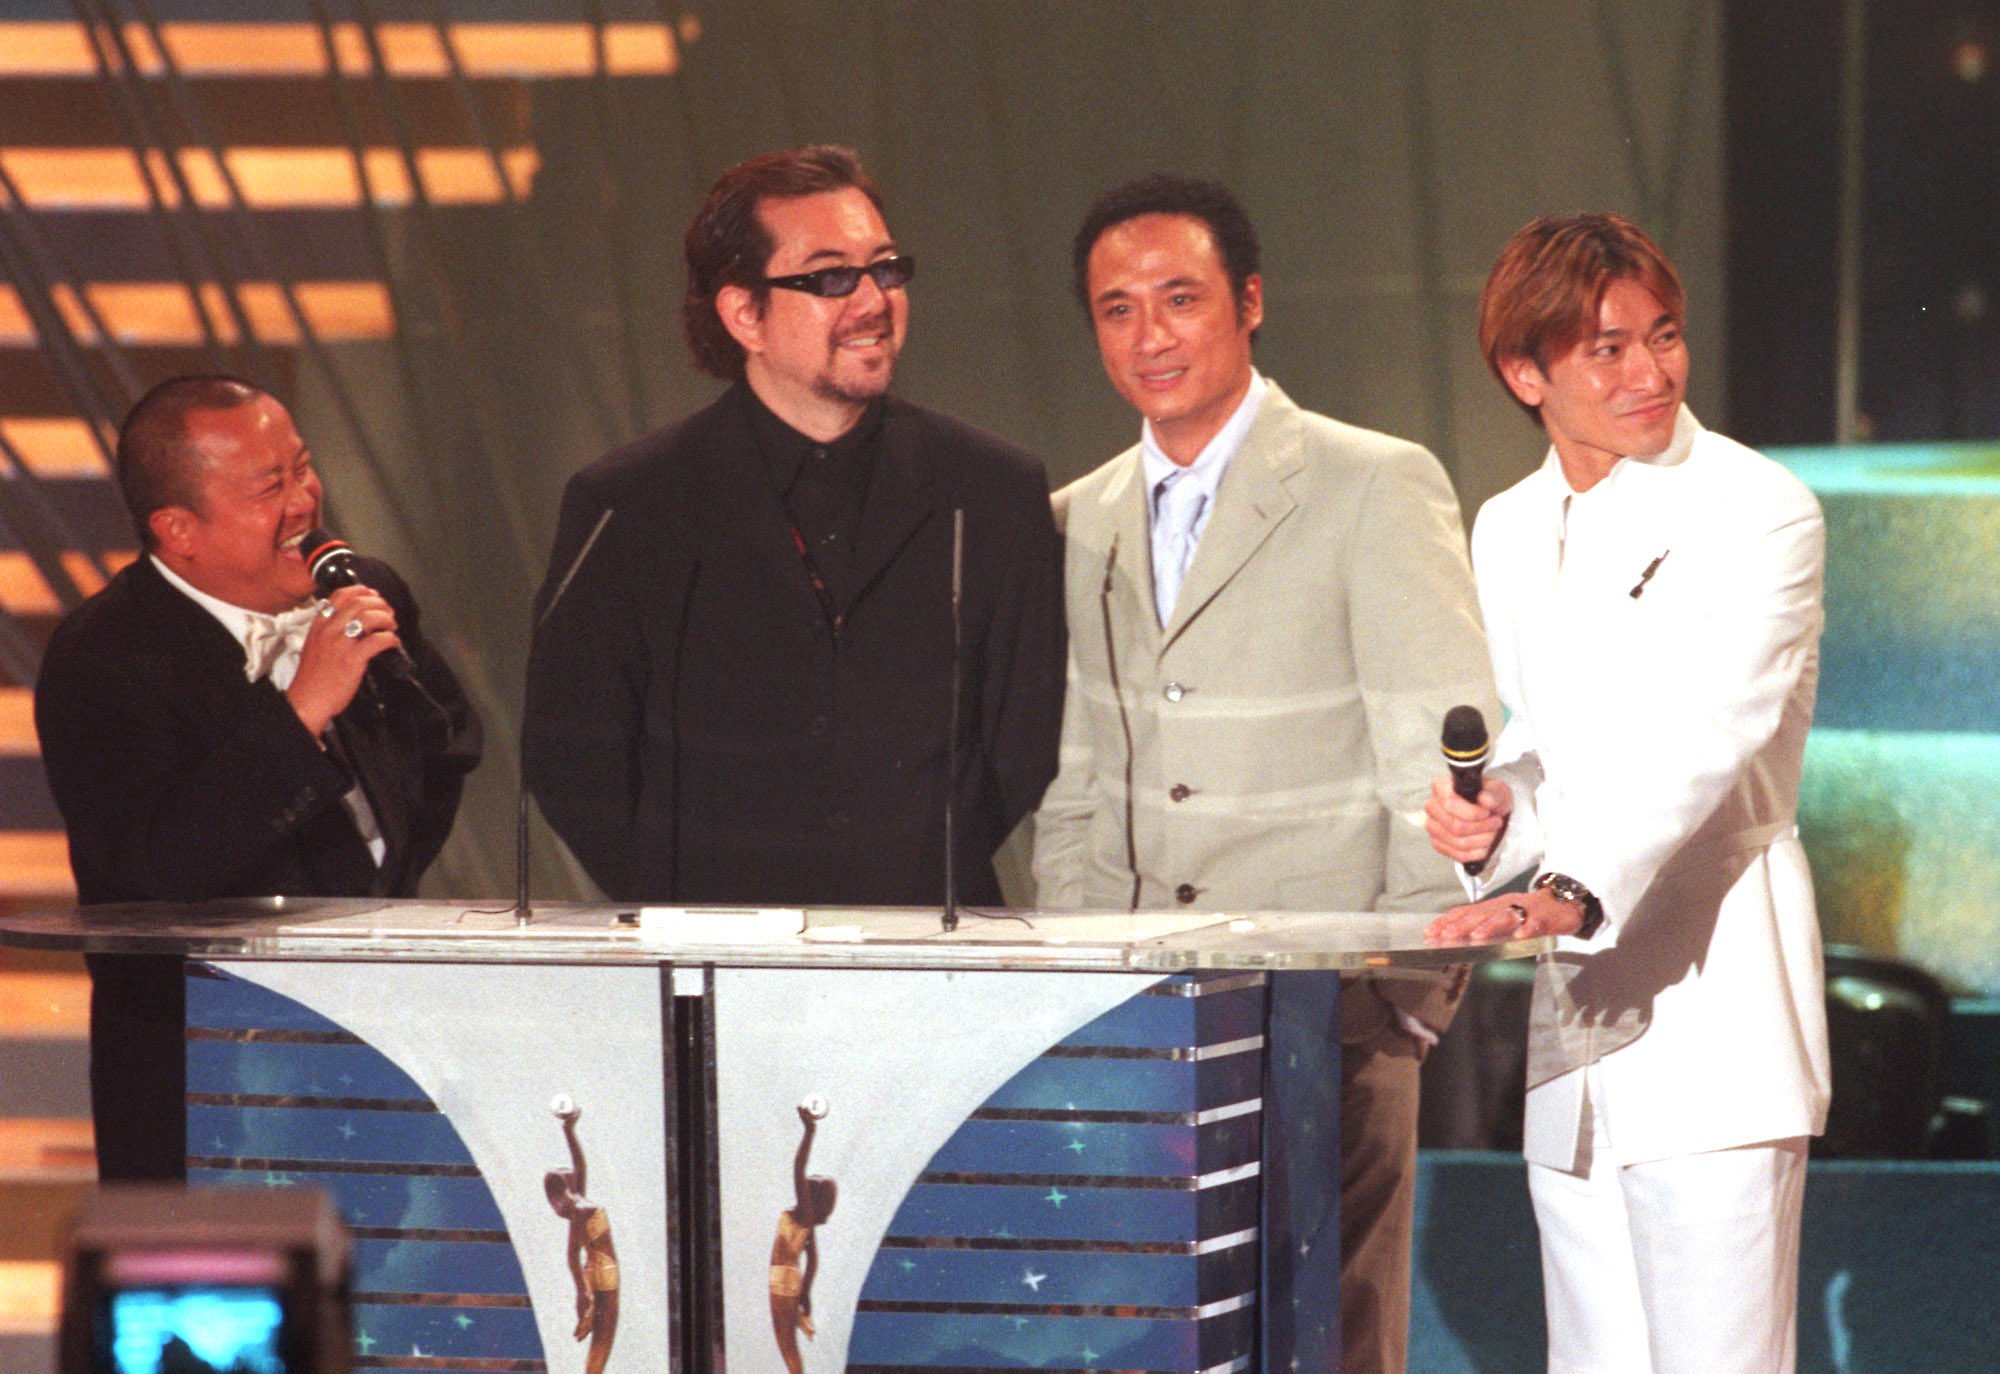 Anthony Wong (left) and Francis Ng at the  19th Hong Kong Film Awards at the Hong Kong Coliseum in April 2000. The pair had been a breath of fresh air for Hong Kong film-goers in the 1990s with their unconventional style. Photo: SCMP